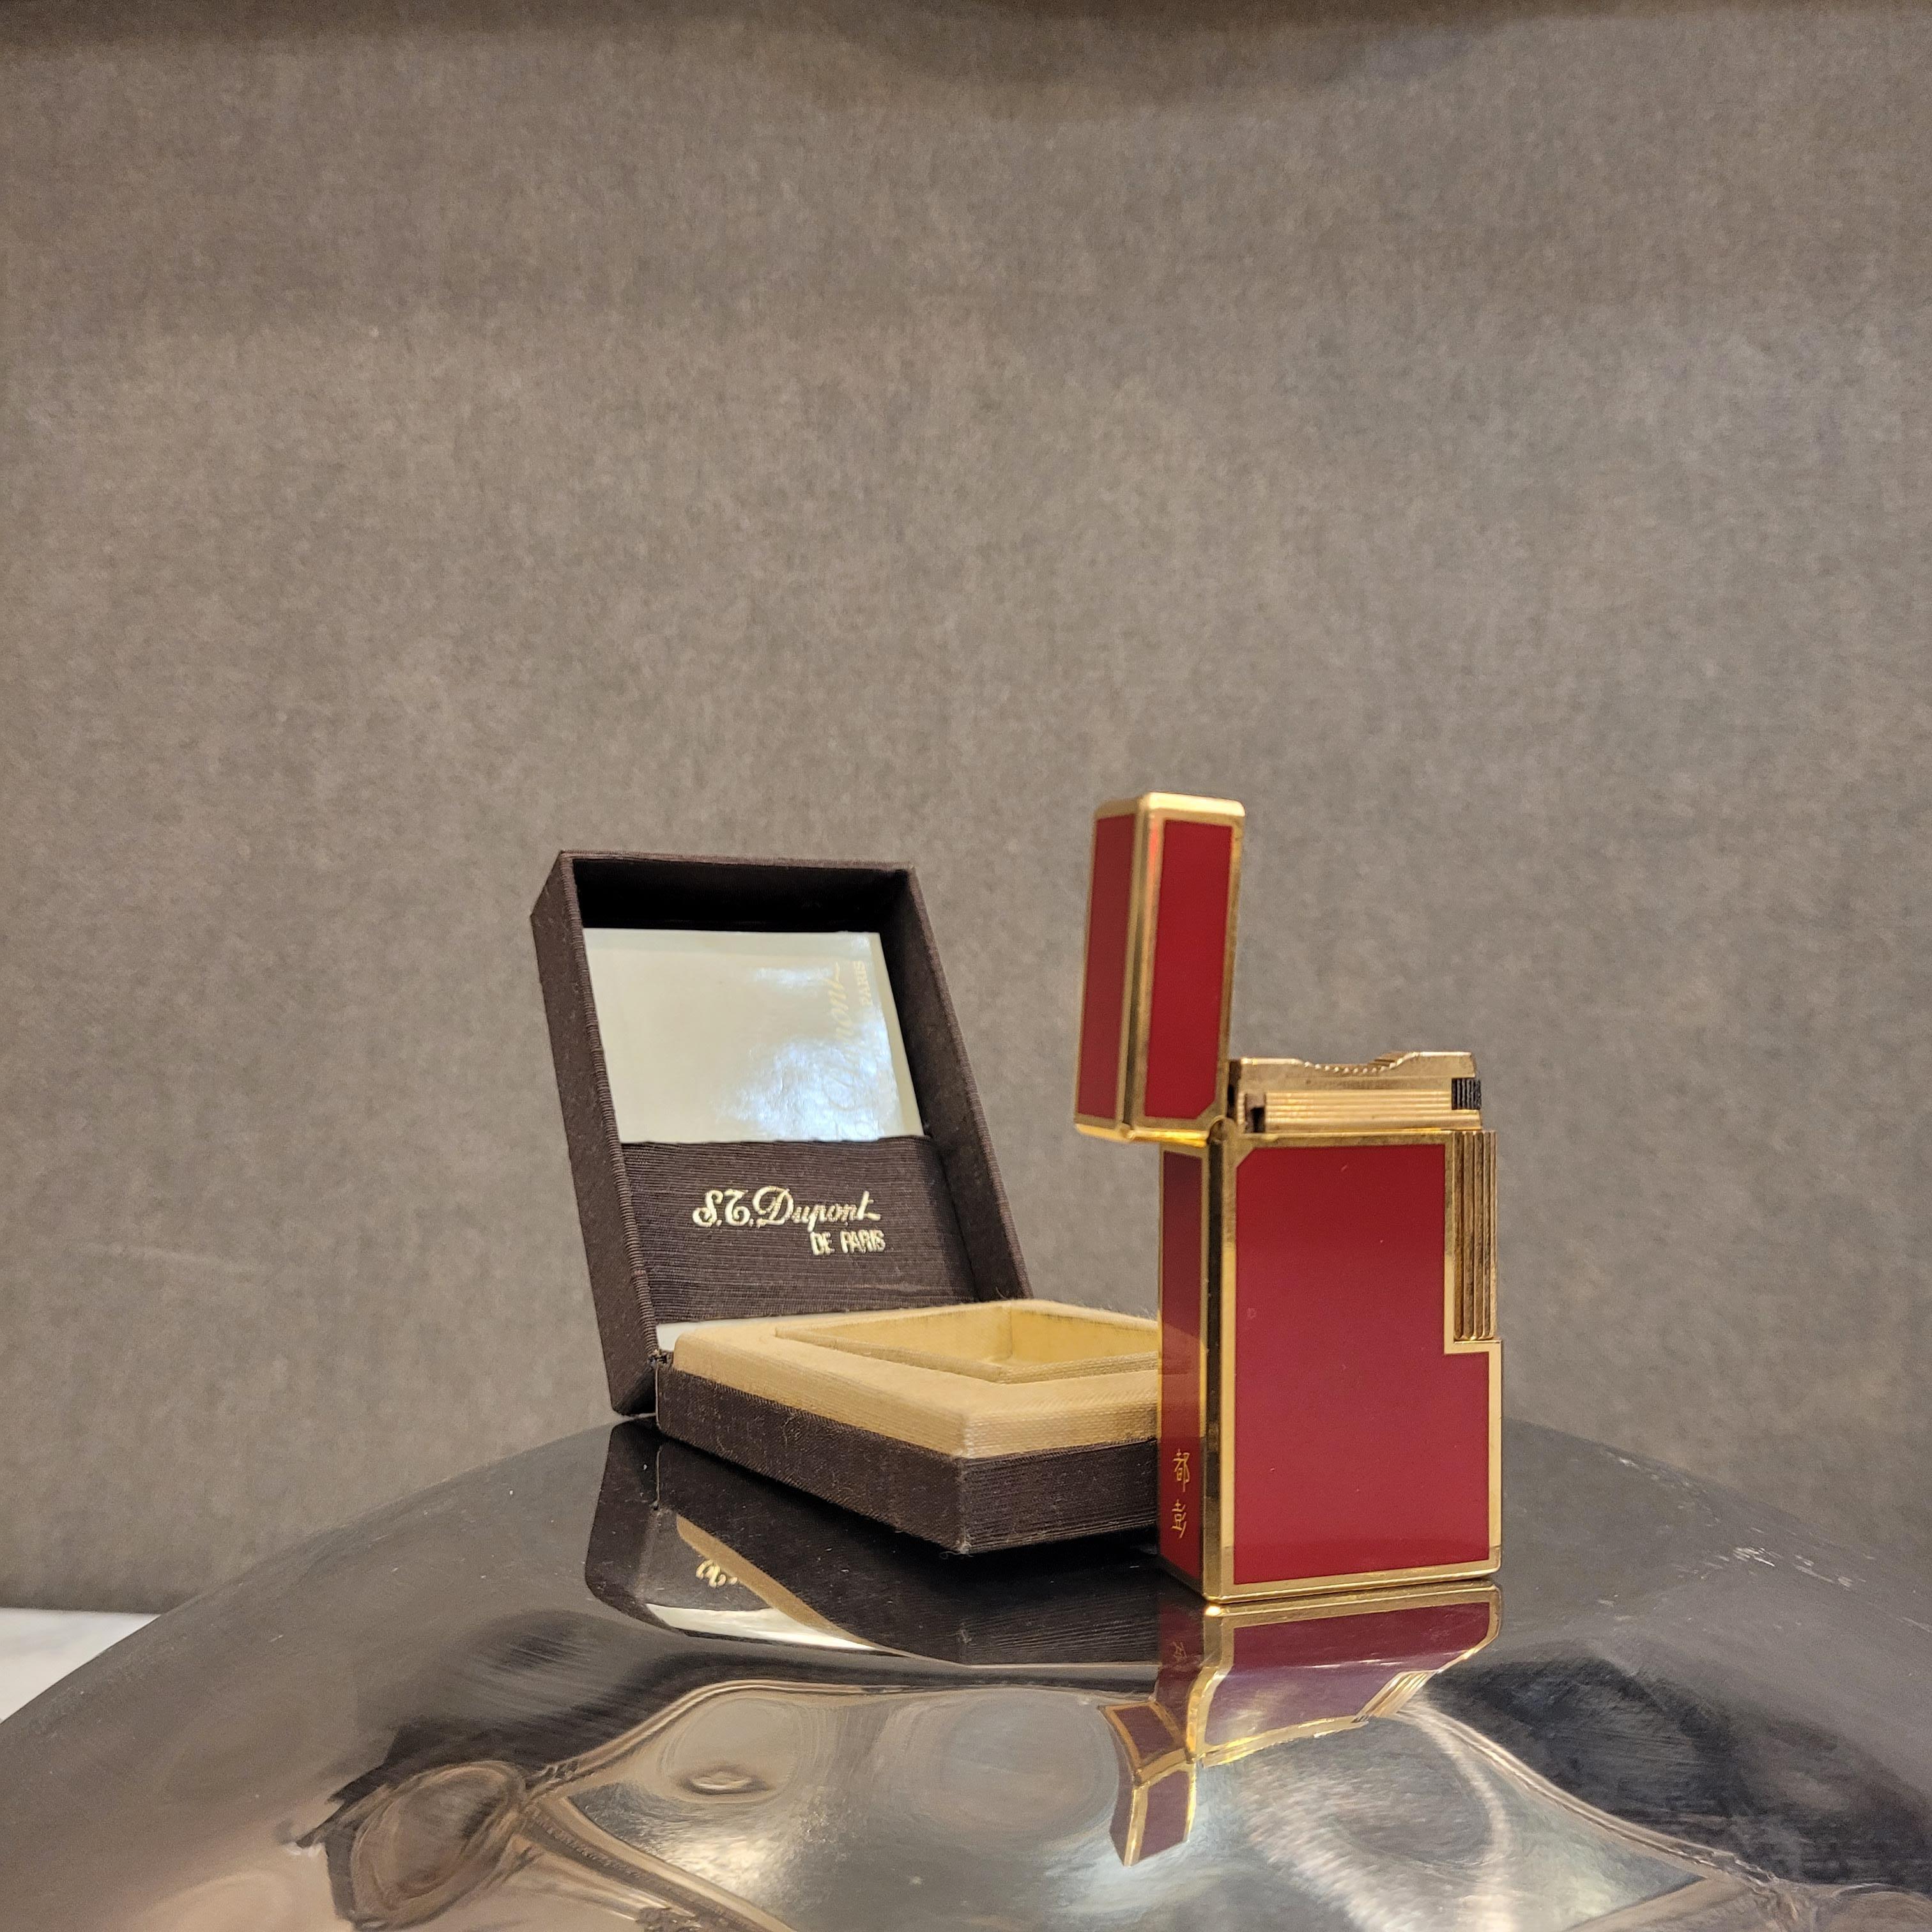 

   
Luxury lighter from the prestigious S.T. Dupont, plated in yellow gold and decorated in authentic Chinese red lacquer, framed between gold profiles. It is engraved with initials (E.E). Its design is a timeless icon among high-end lighters. On